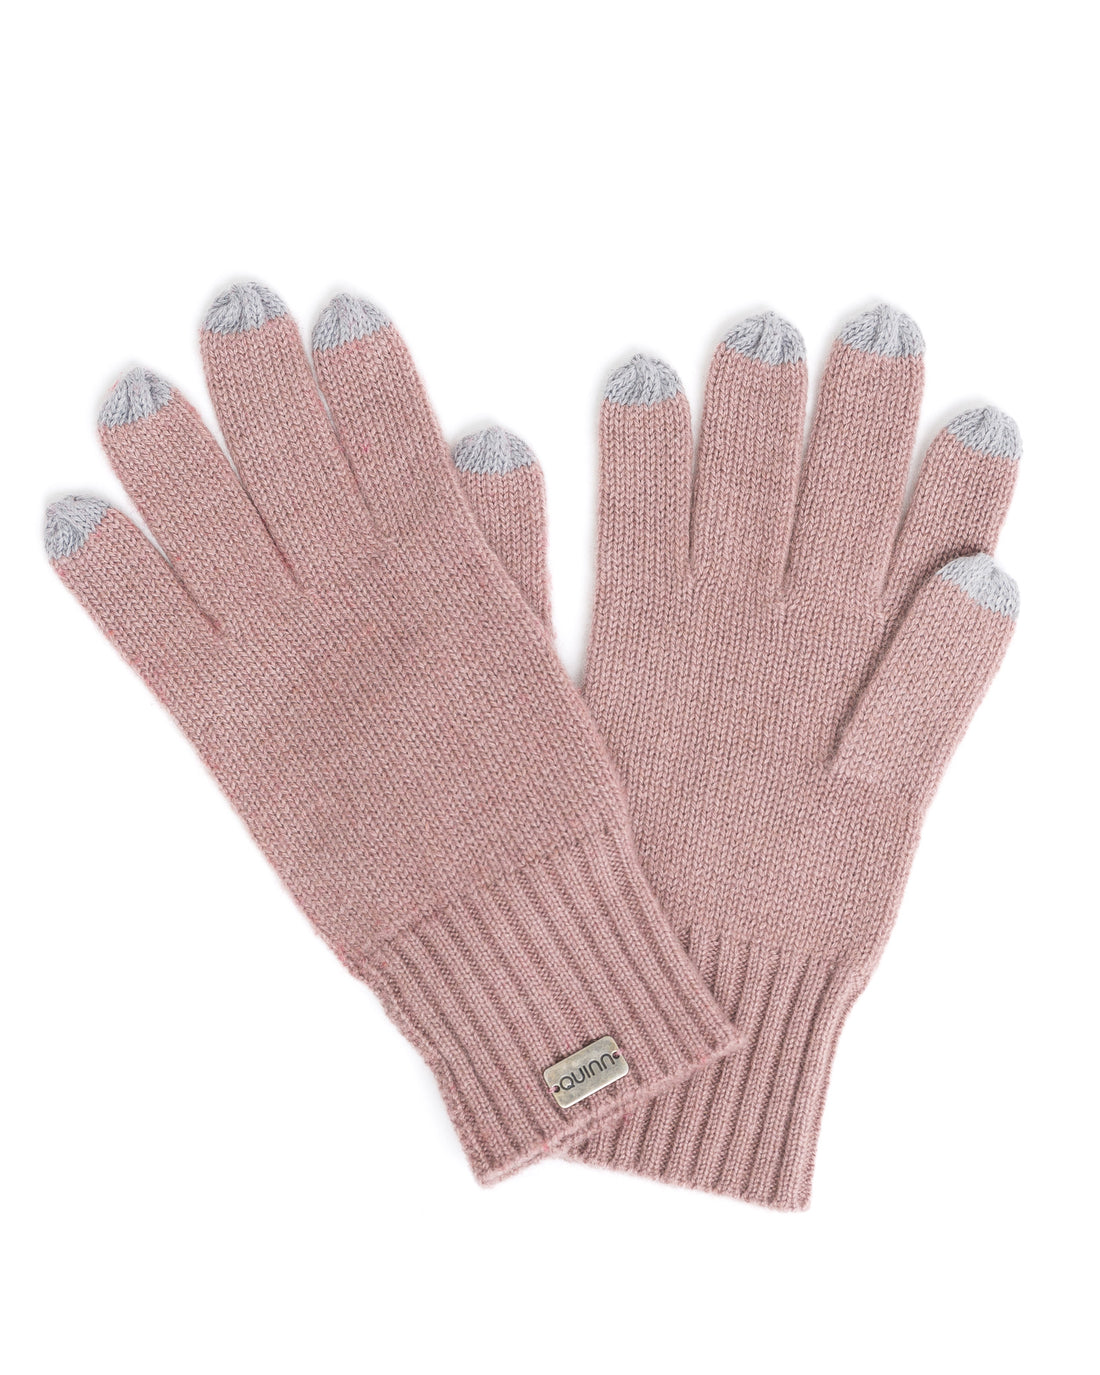 ACCESSORIES - Cashmere Texting Gloves